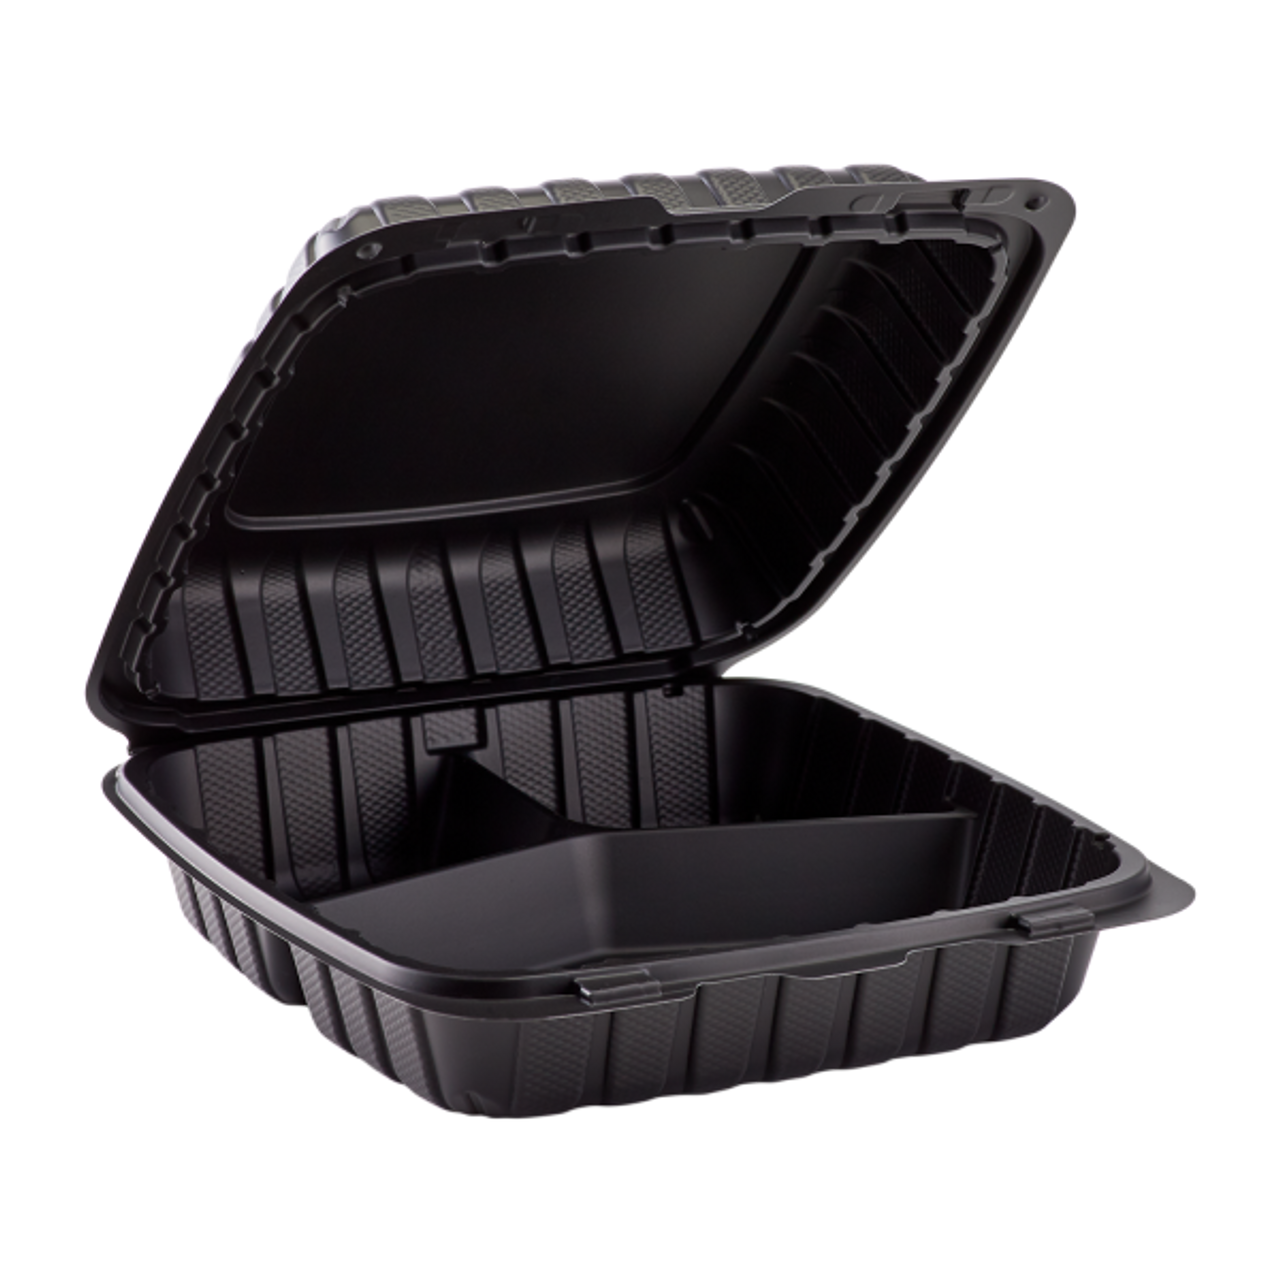 150-Count 3-Compartment Hinged Black Meal Prep/Take Out Containers - 9